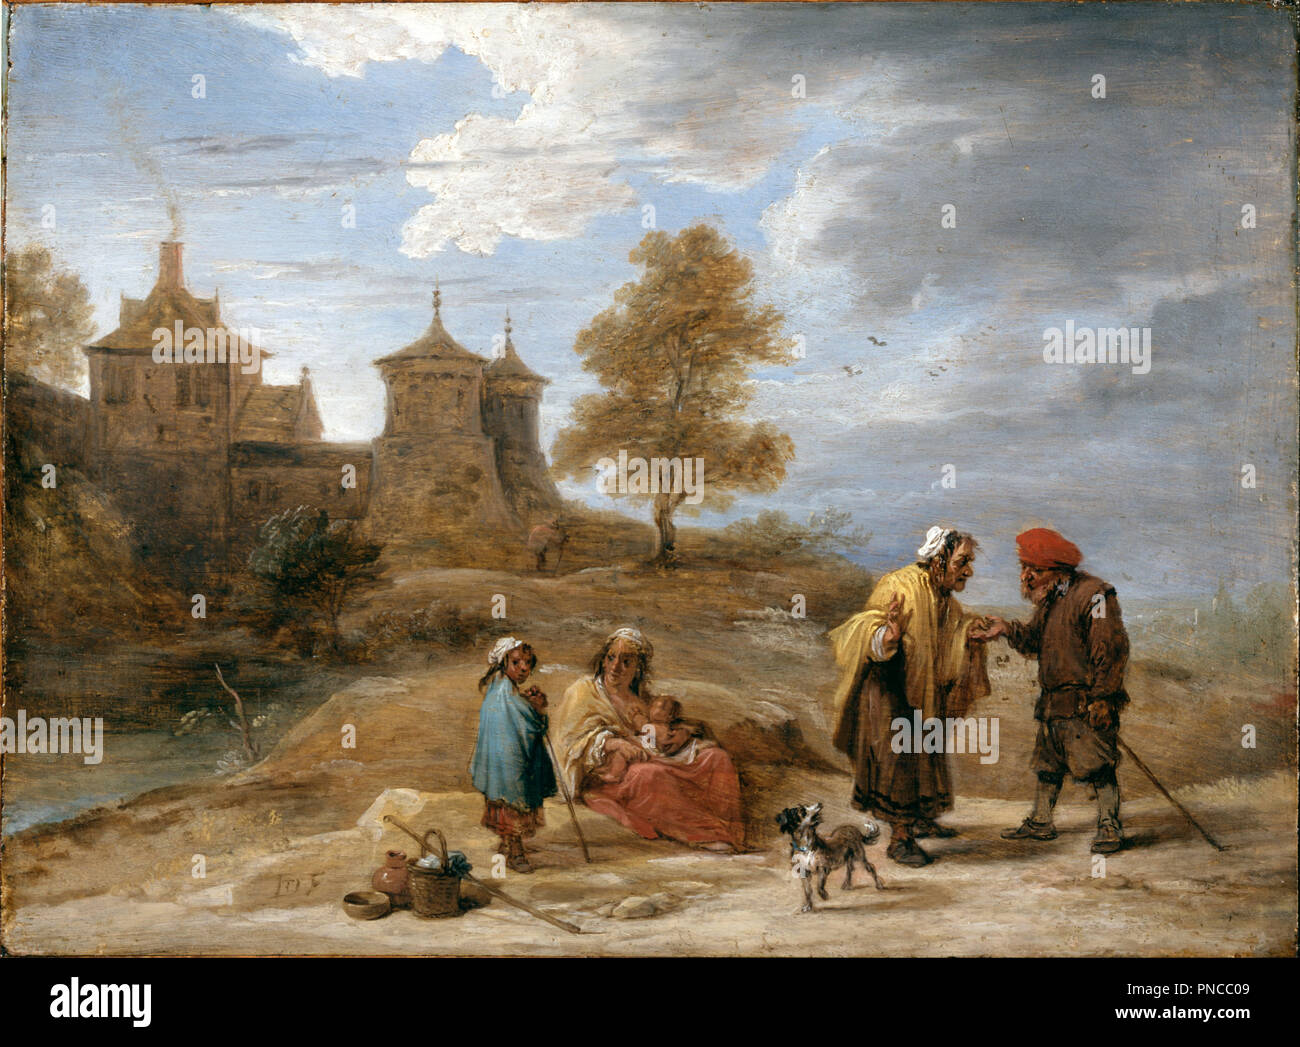 Gypsies in a Landscape. Date/Period: Before 1690. Painting. Oil on panel Oil. Height: 230 mm (9.05 in); Width: 306 mm (12.04 in). Author: TENIERS THE YOUNGER, DAVID. DAVID TENIERS, THE YOUNGER. Stock Photo